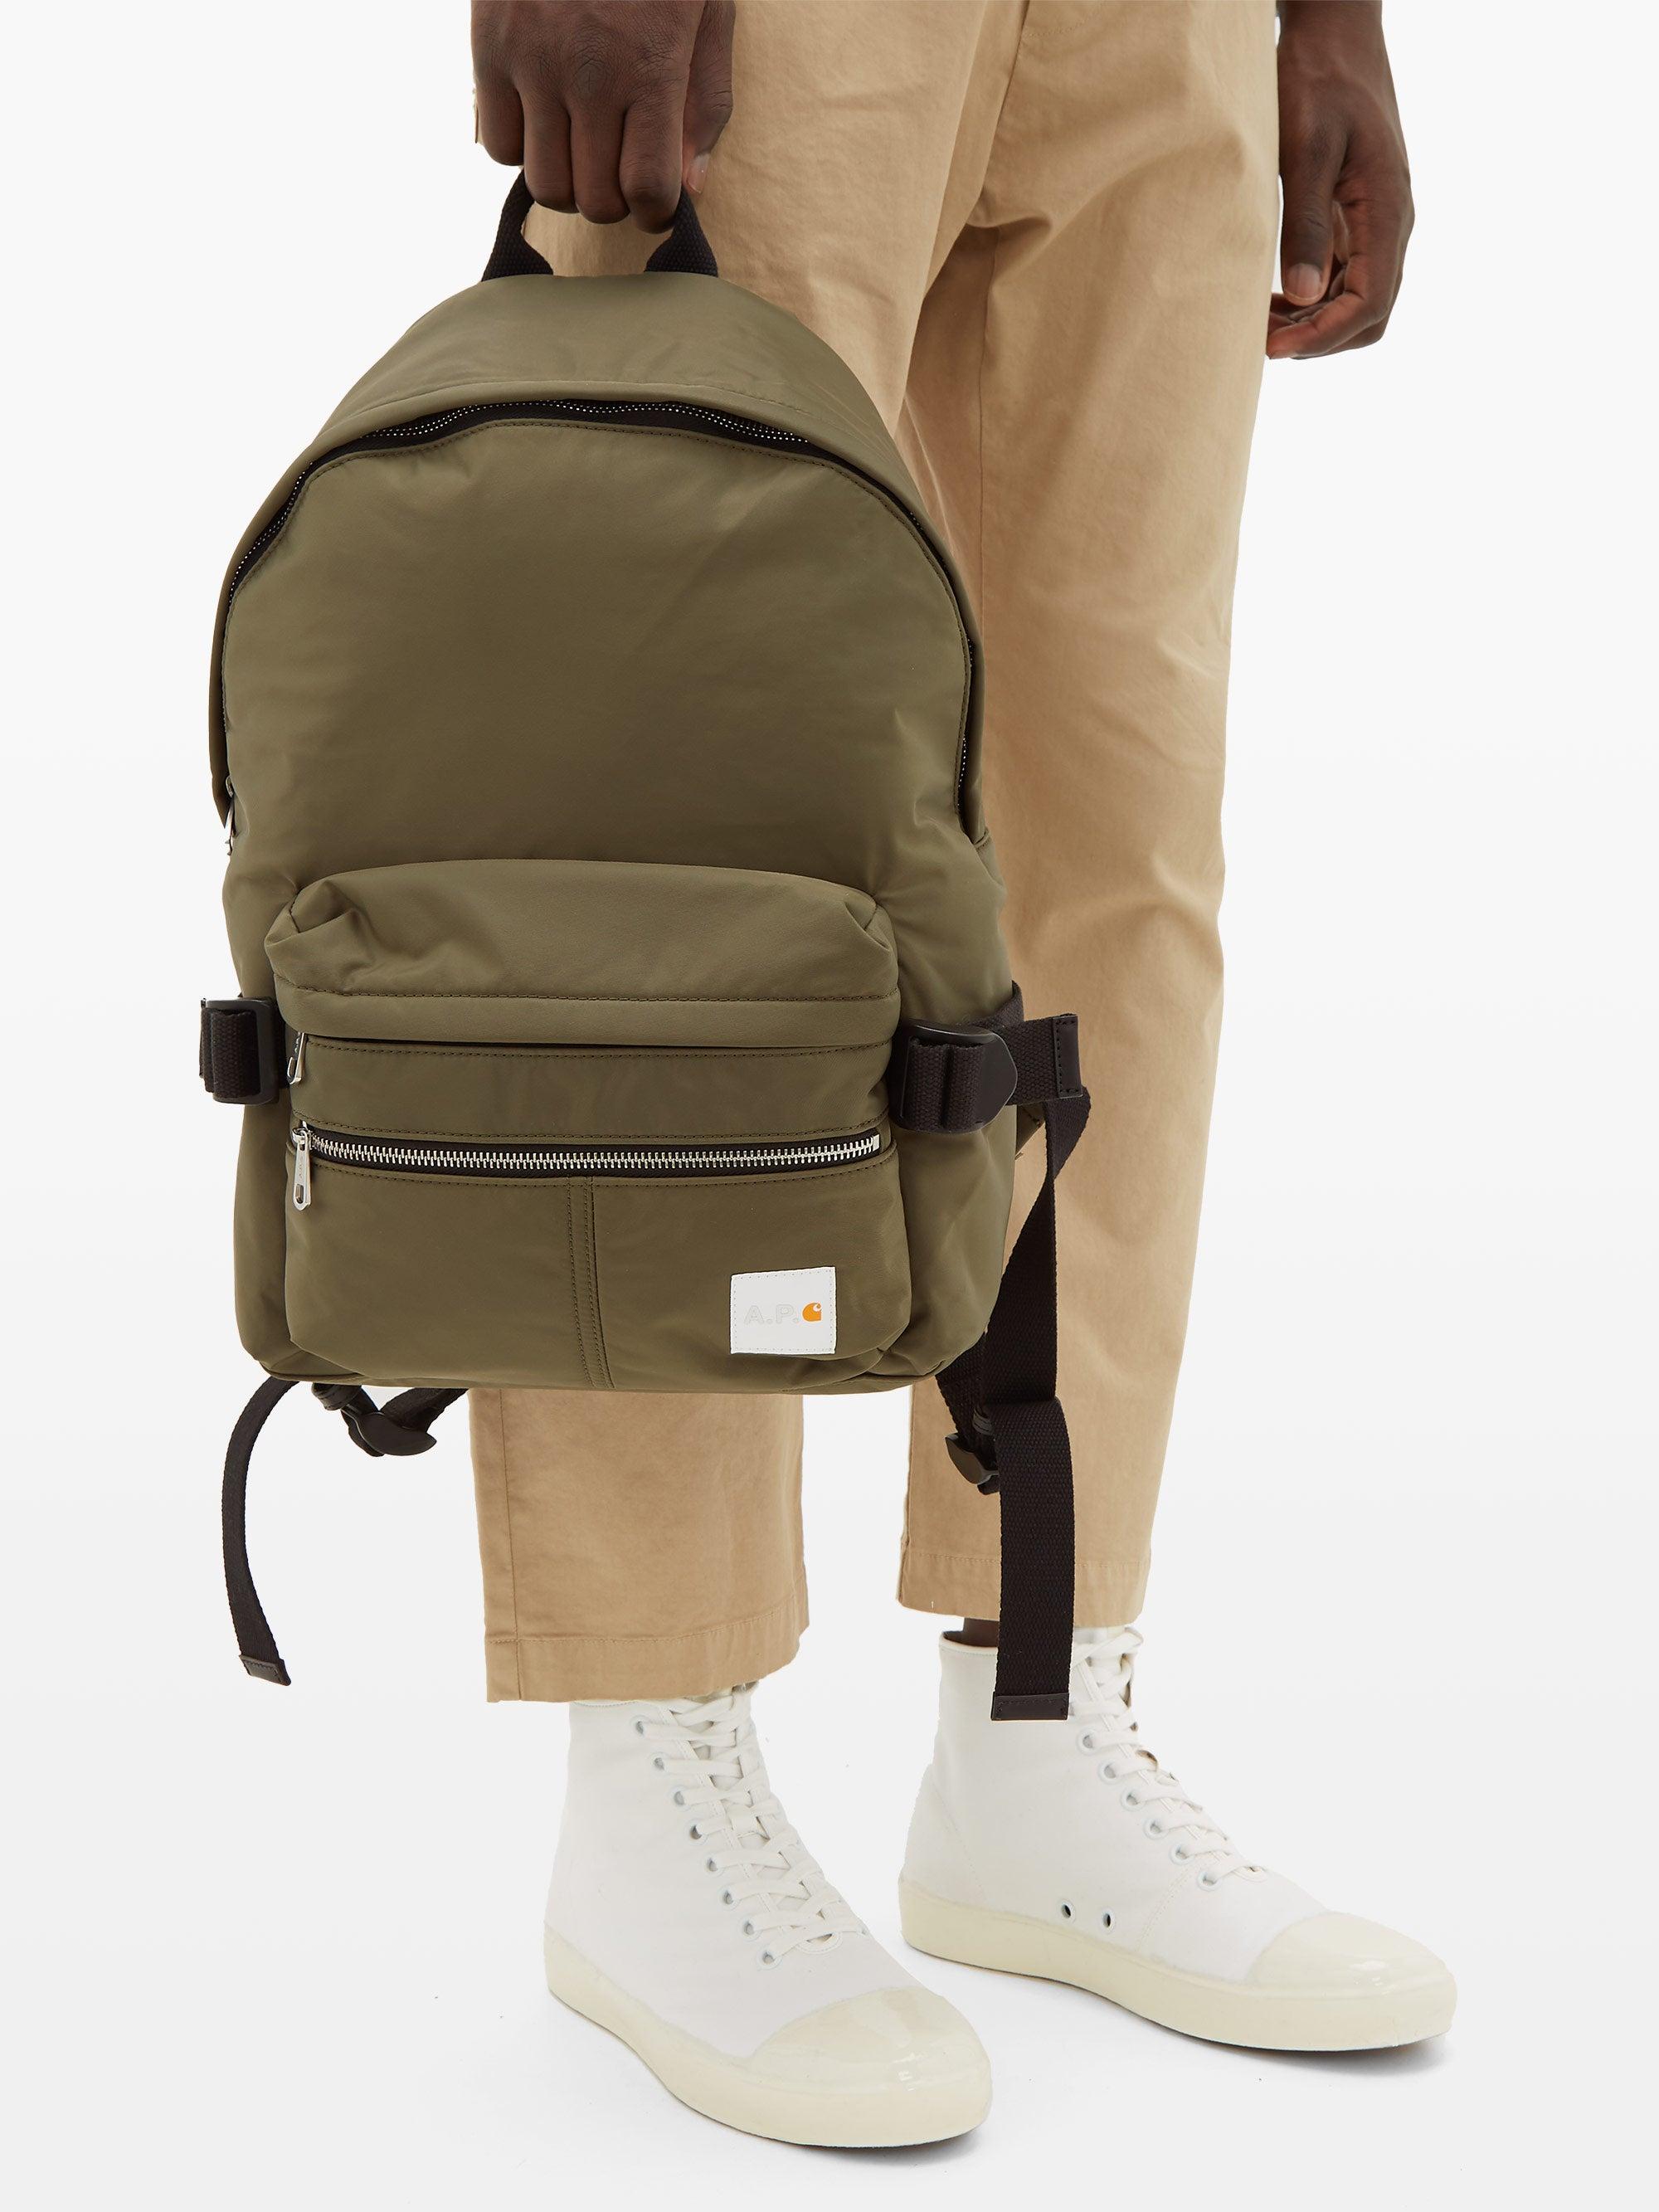 A.P.C. Synthetic X Carhartt Nylon Backpack in Khaki (Green) for Men | Lyst